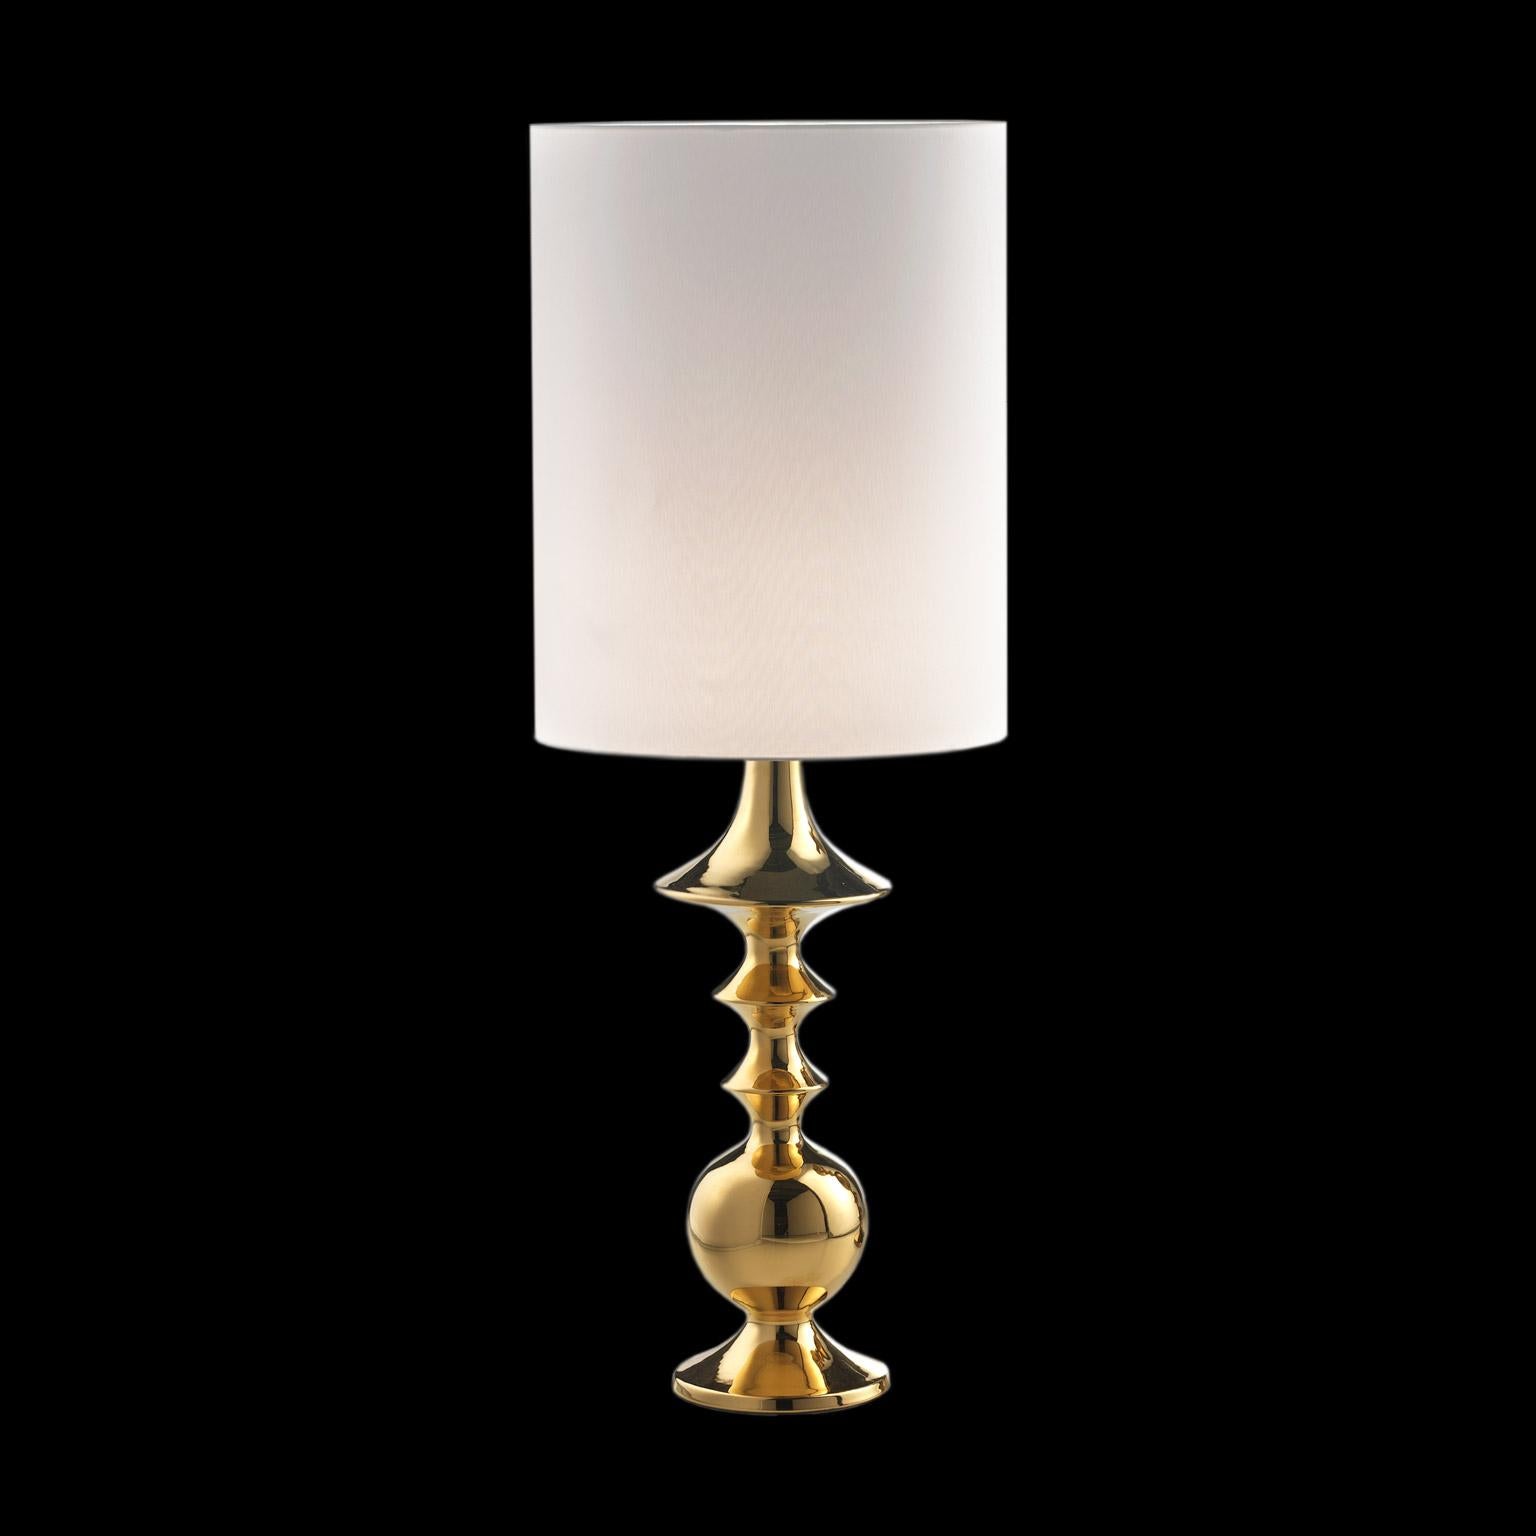 Ceramic lamp BRIX
cod. LB001 
handcrafted in 24-karat gold 
with cotton lampshade

measures: 
H. 90.0 cm.
Dm. 40.0 cm.